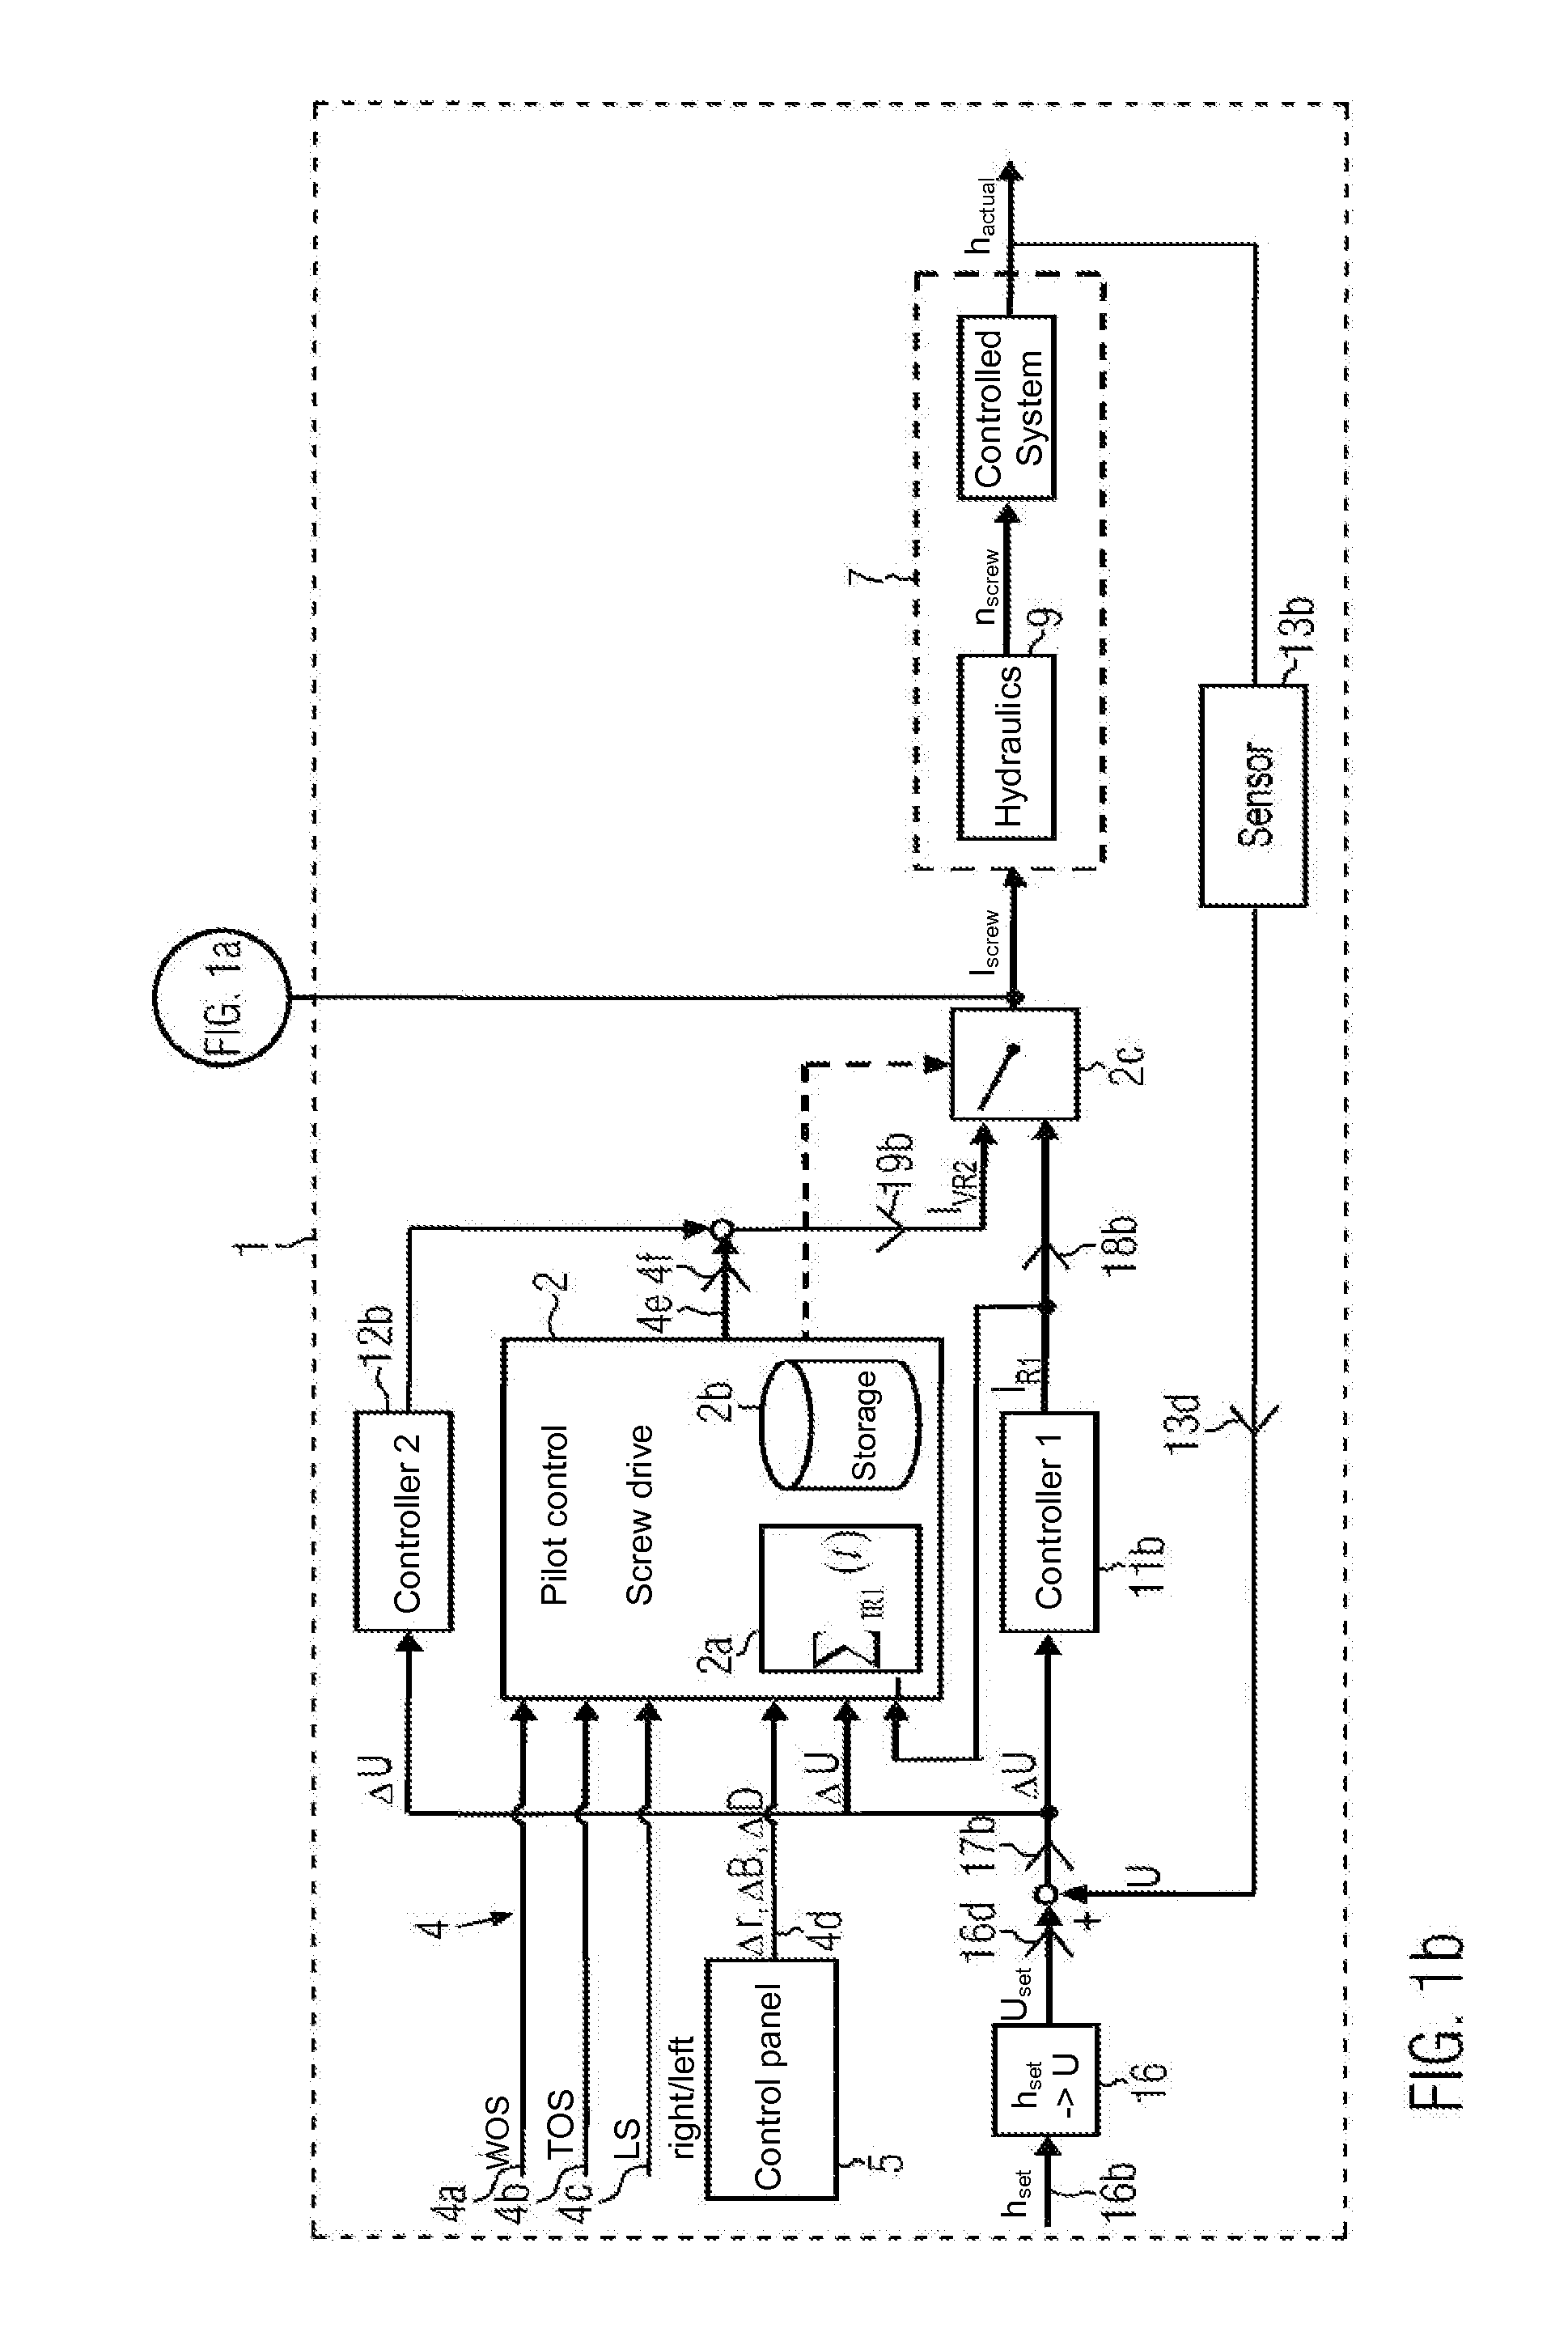 Road finishing machine with controllable conveyor devices